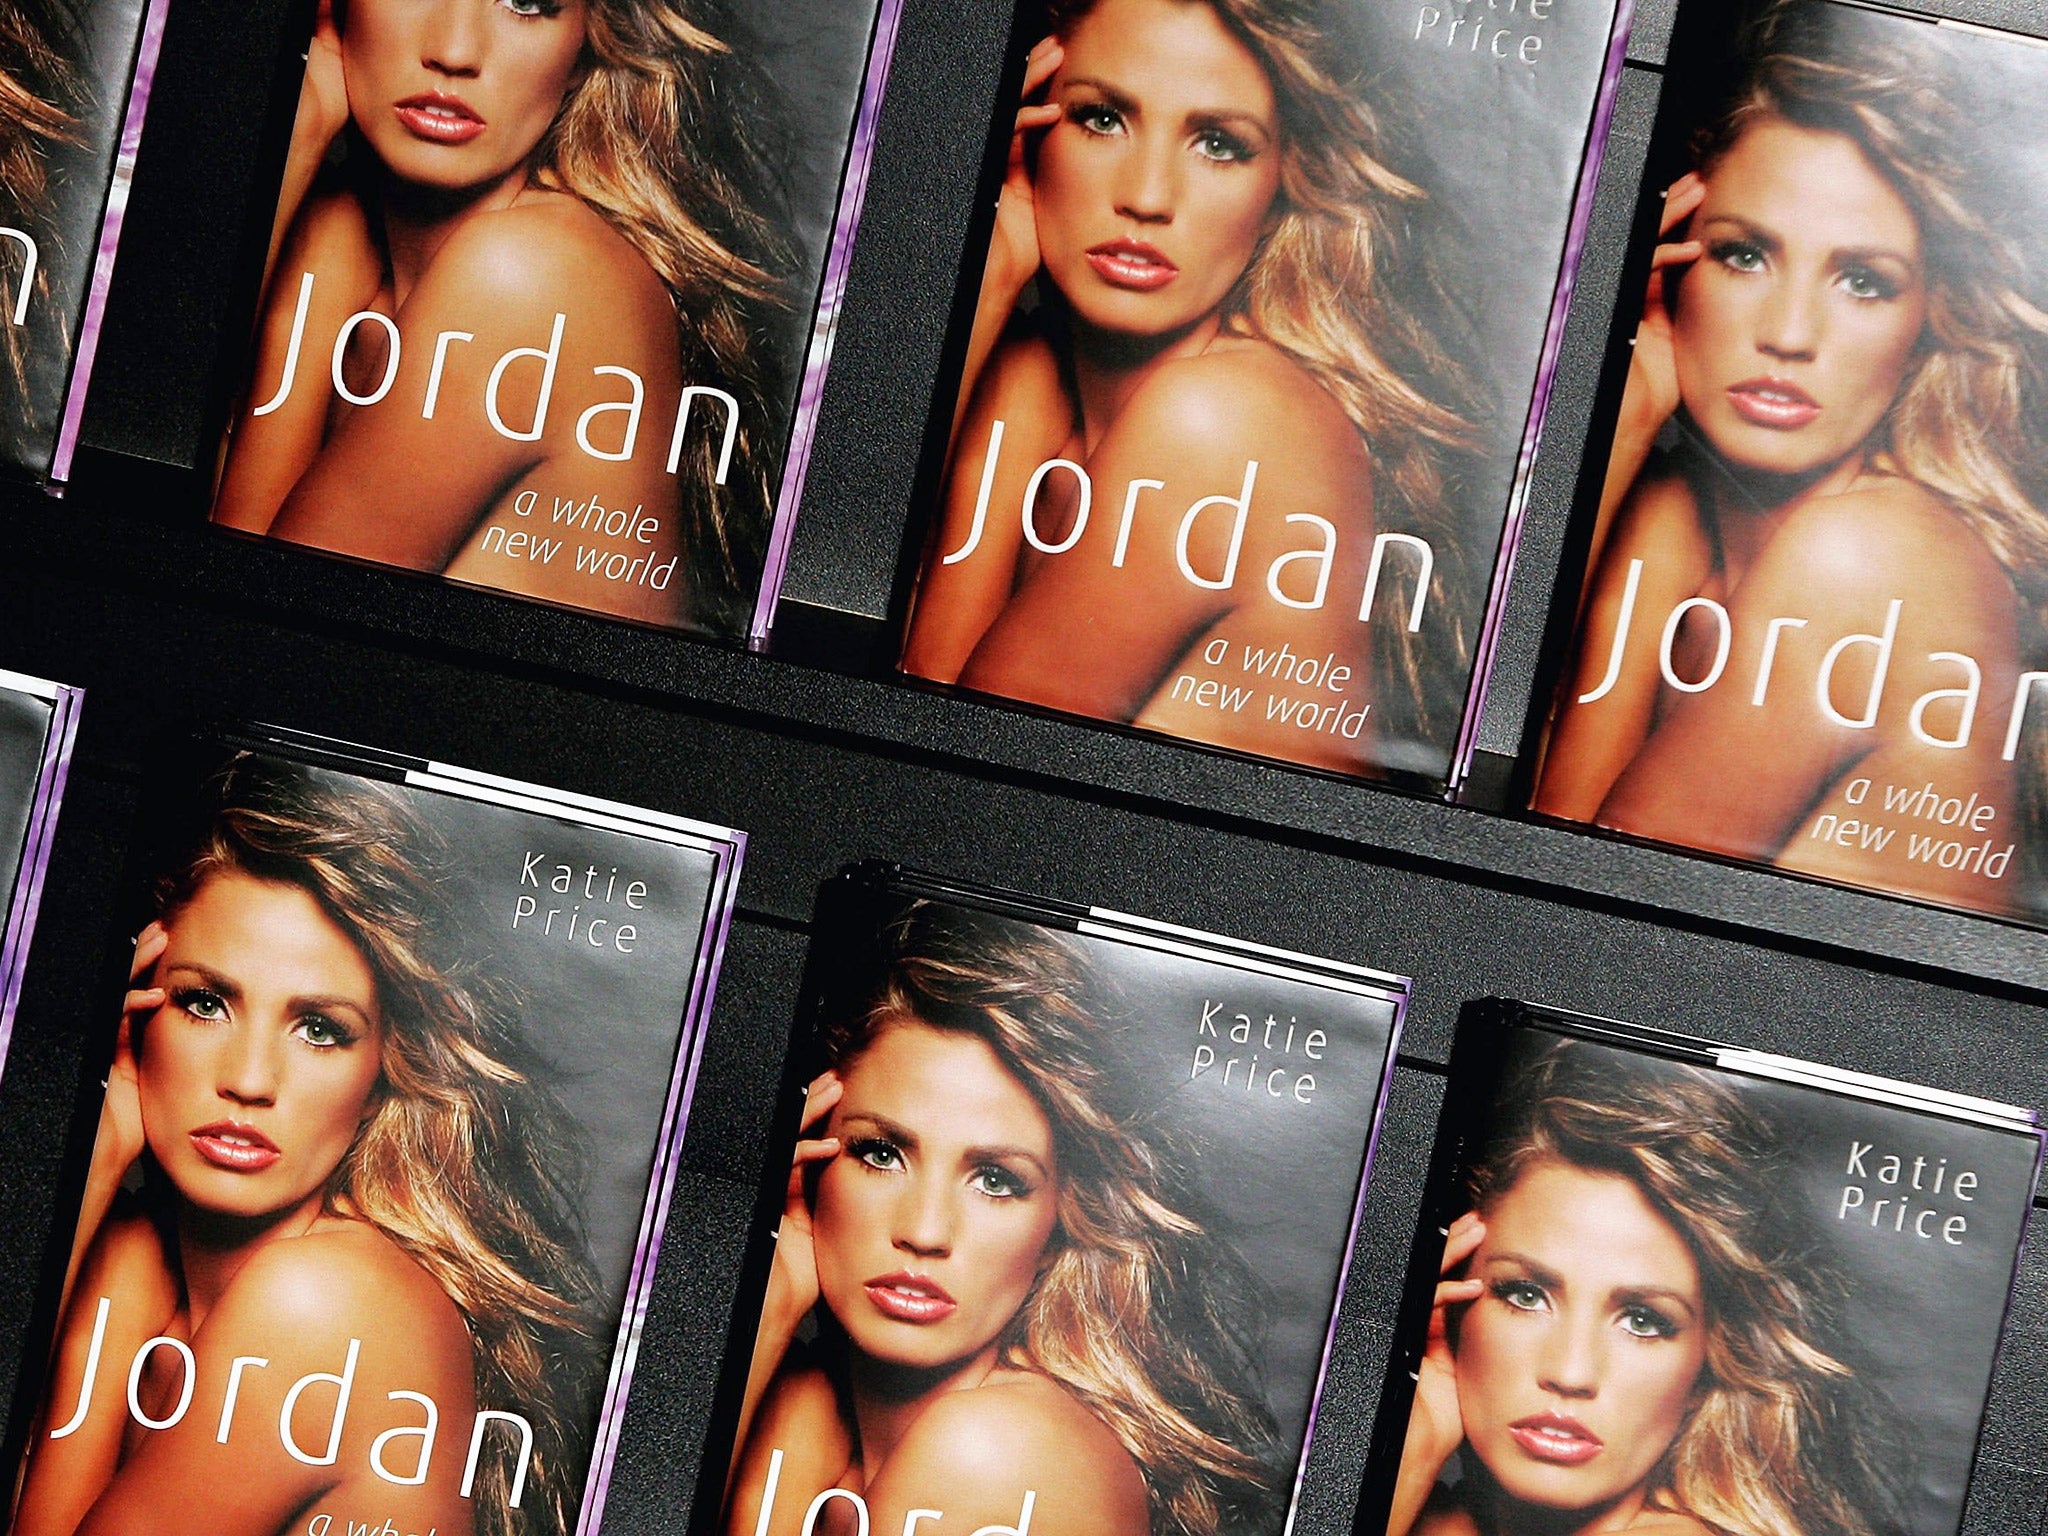 The autobiography of glamour model and reality TV star, Katie Price, aka Jordan (Getty)